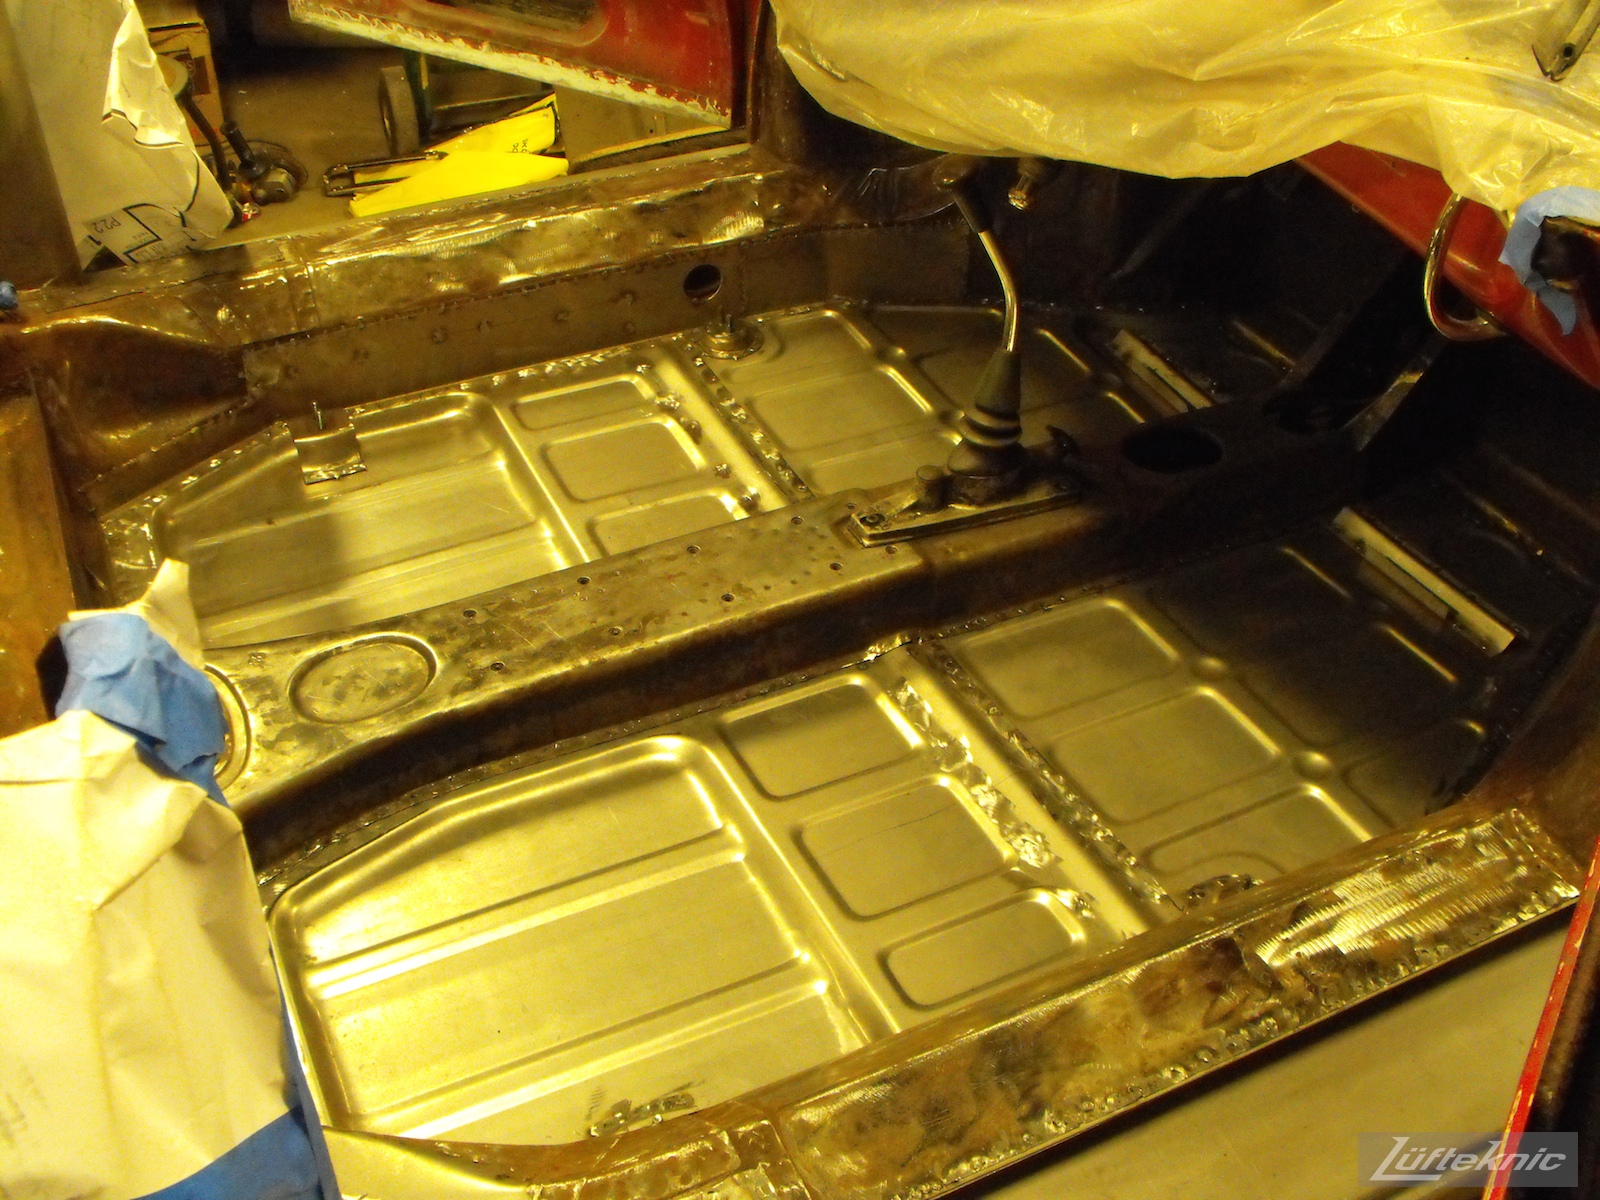 New floors spot welded and installed into a 1961 Porsche 356B Roadster restoration.